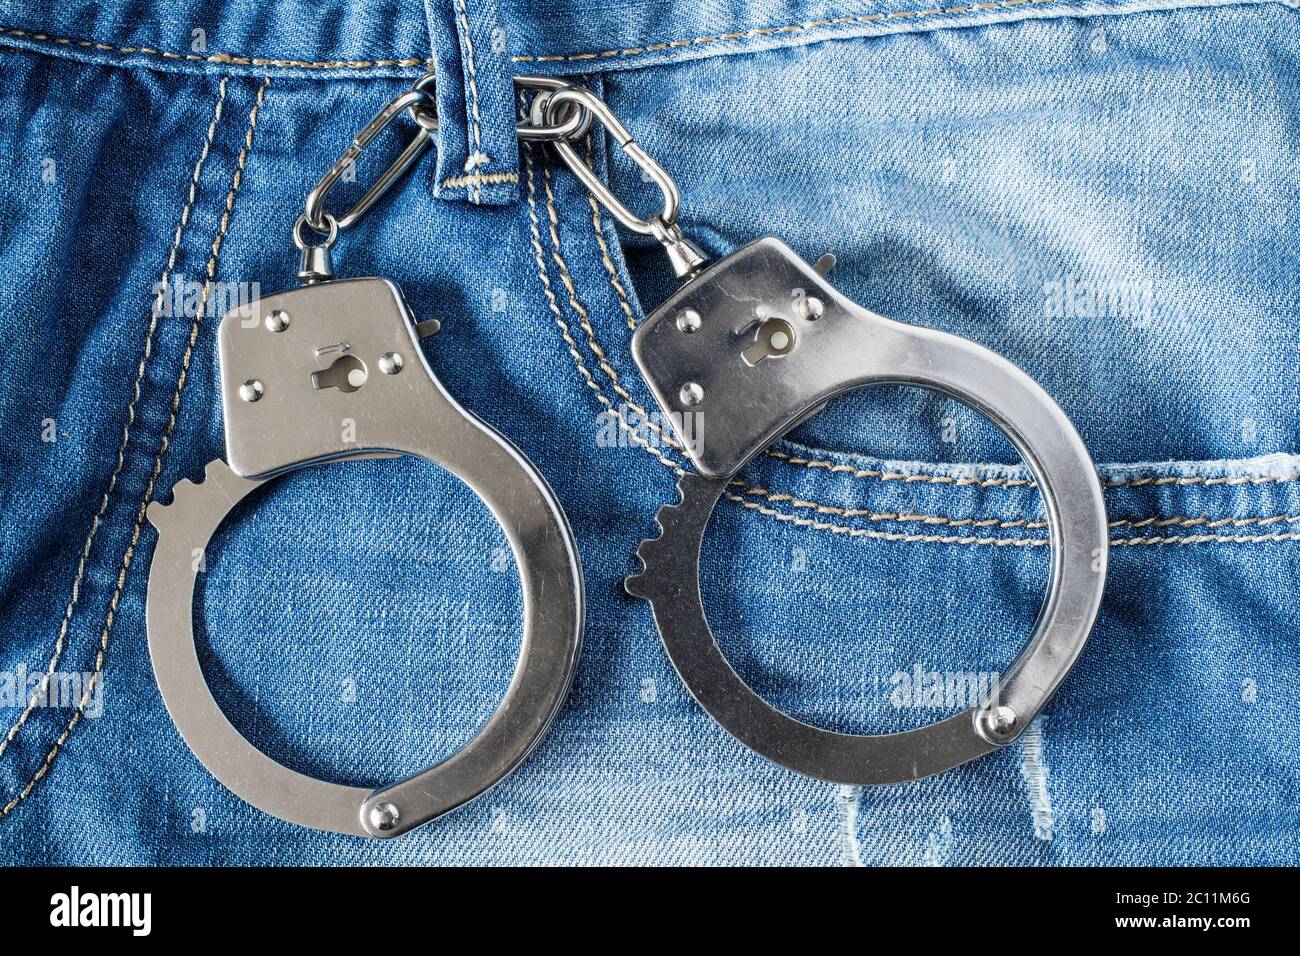 Handcuffs hanging on a belt of jeans Stock Photo